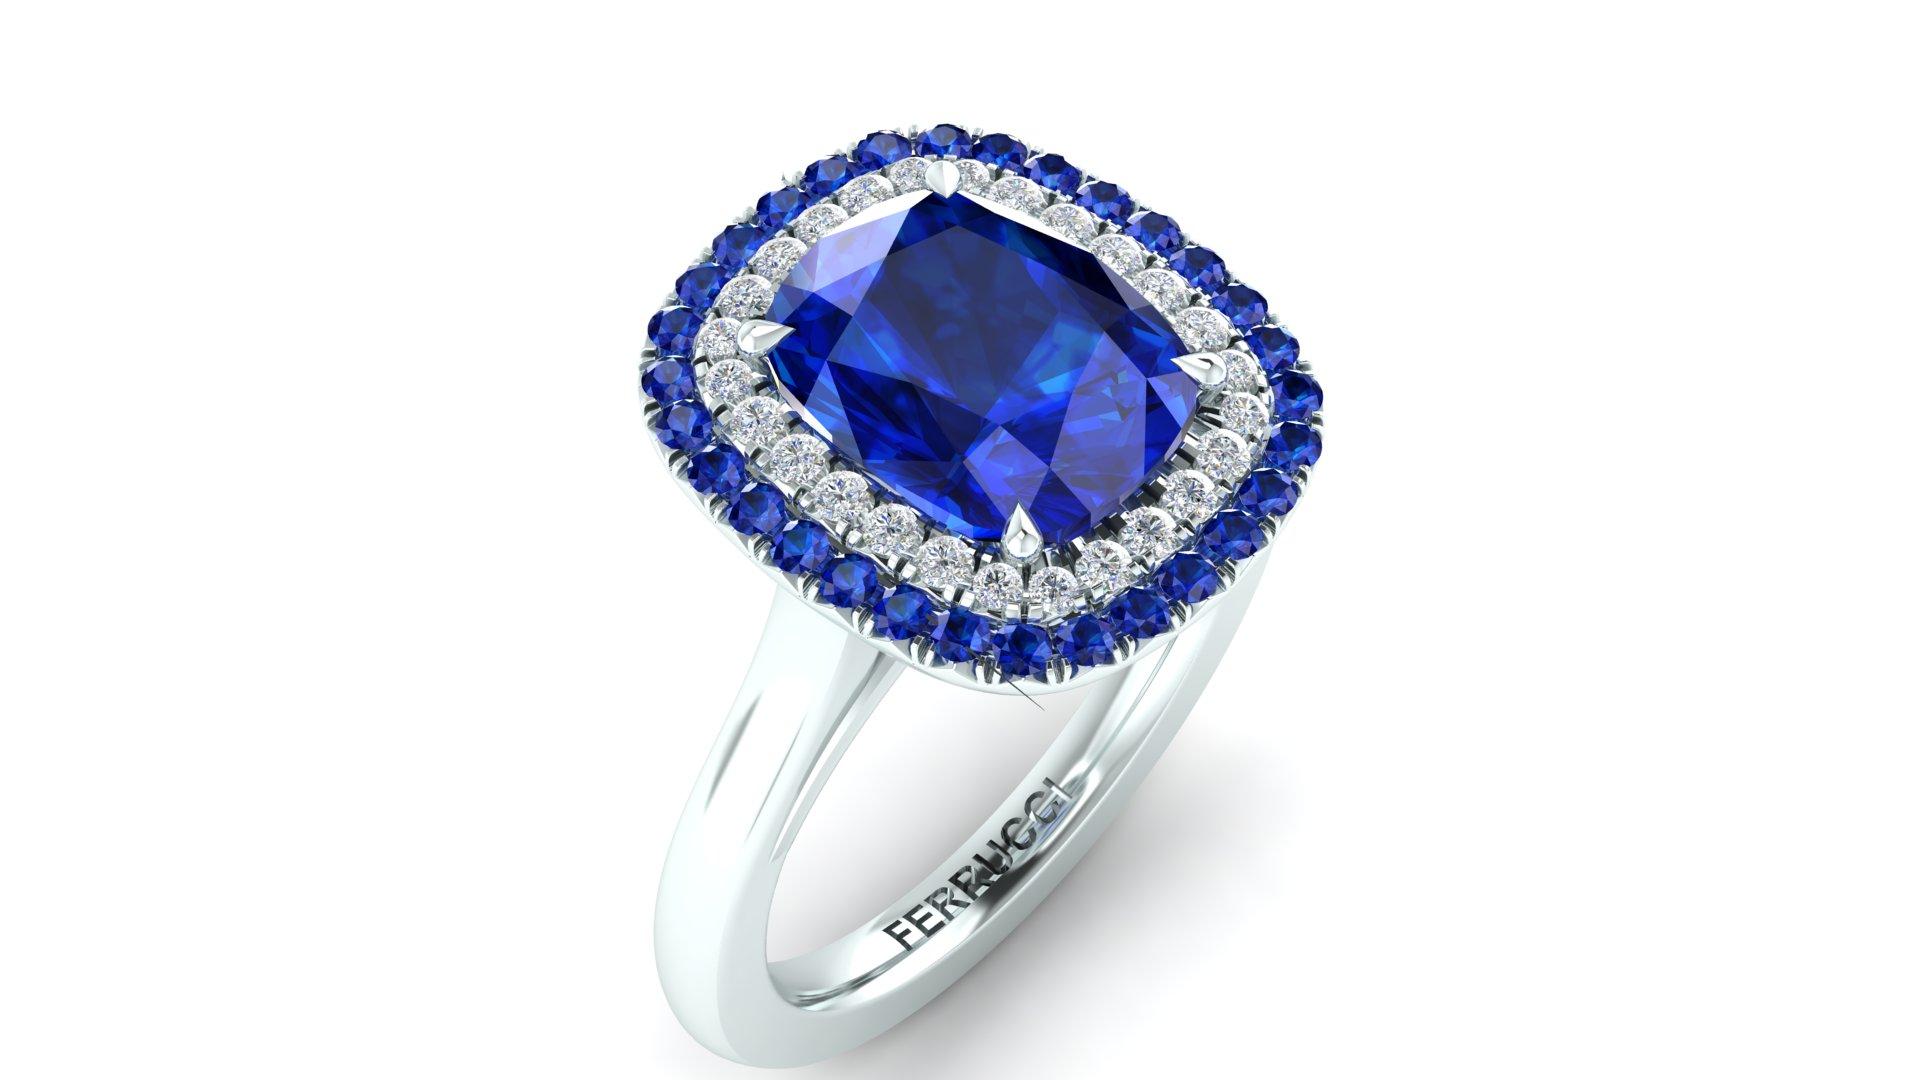 3 carat center Cushion Blue Sapphire set in a Double Sapphire and Diamonds Halo with a total Sapphires weight of 0.25ct and an approximate diamond carat weight of 0.10 carats.
Made upon order, the finger size can be custom made to perfection
